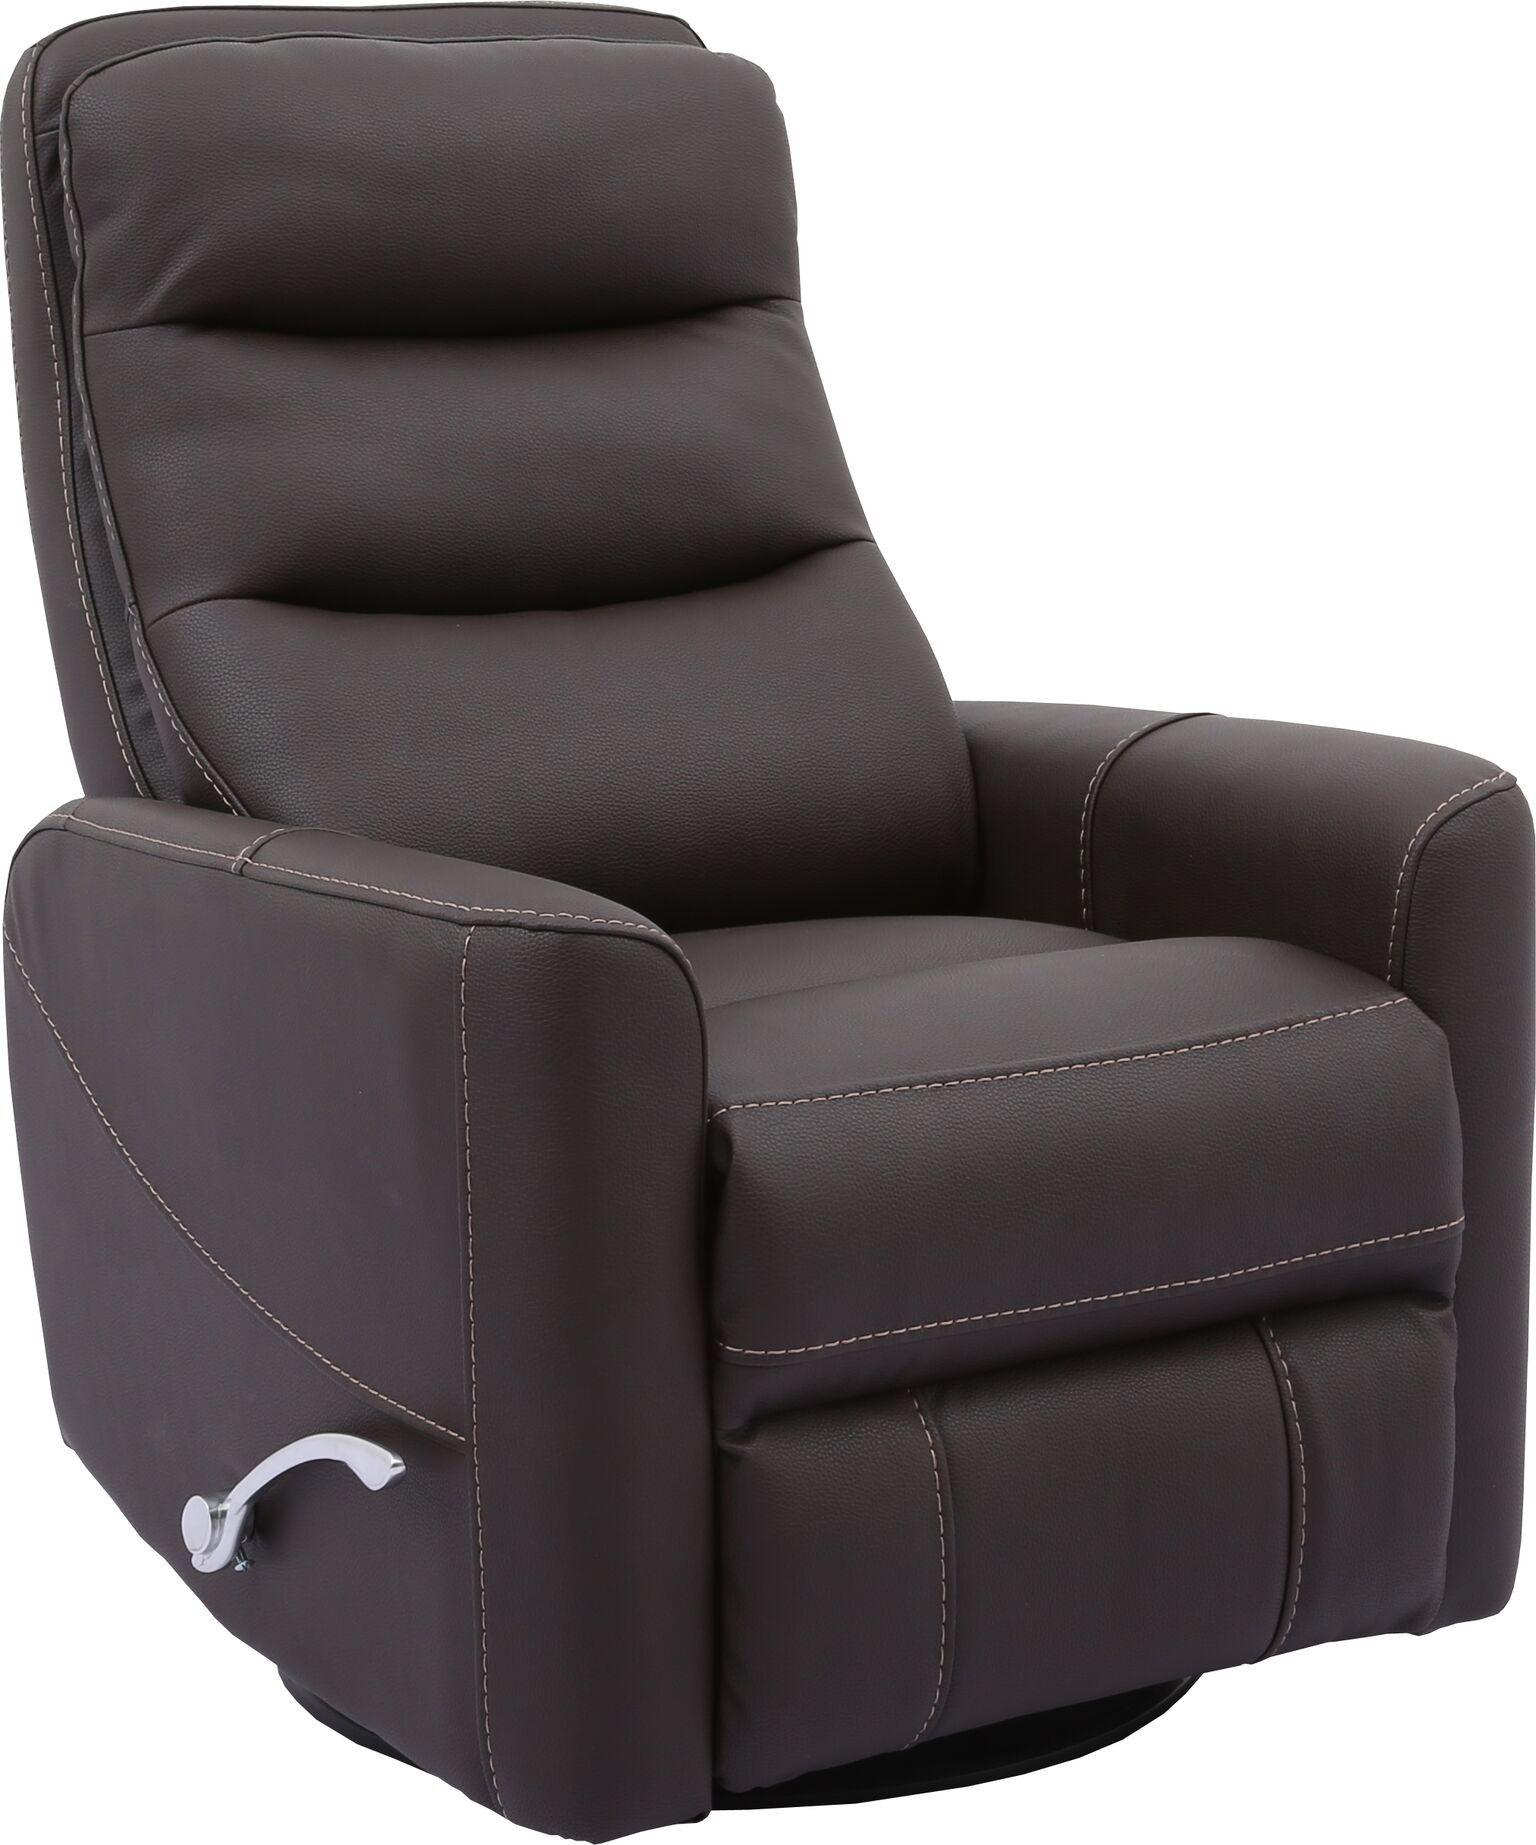 Hercules  Chocolate  Swivel Glider Recliner With Articulating Headrest Throughout Hercules Oyster Swivel Glider Recliners (Photo 3 of 25)